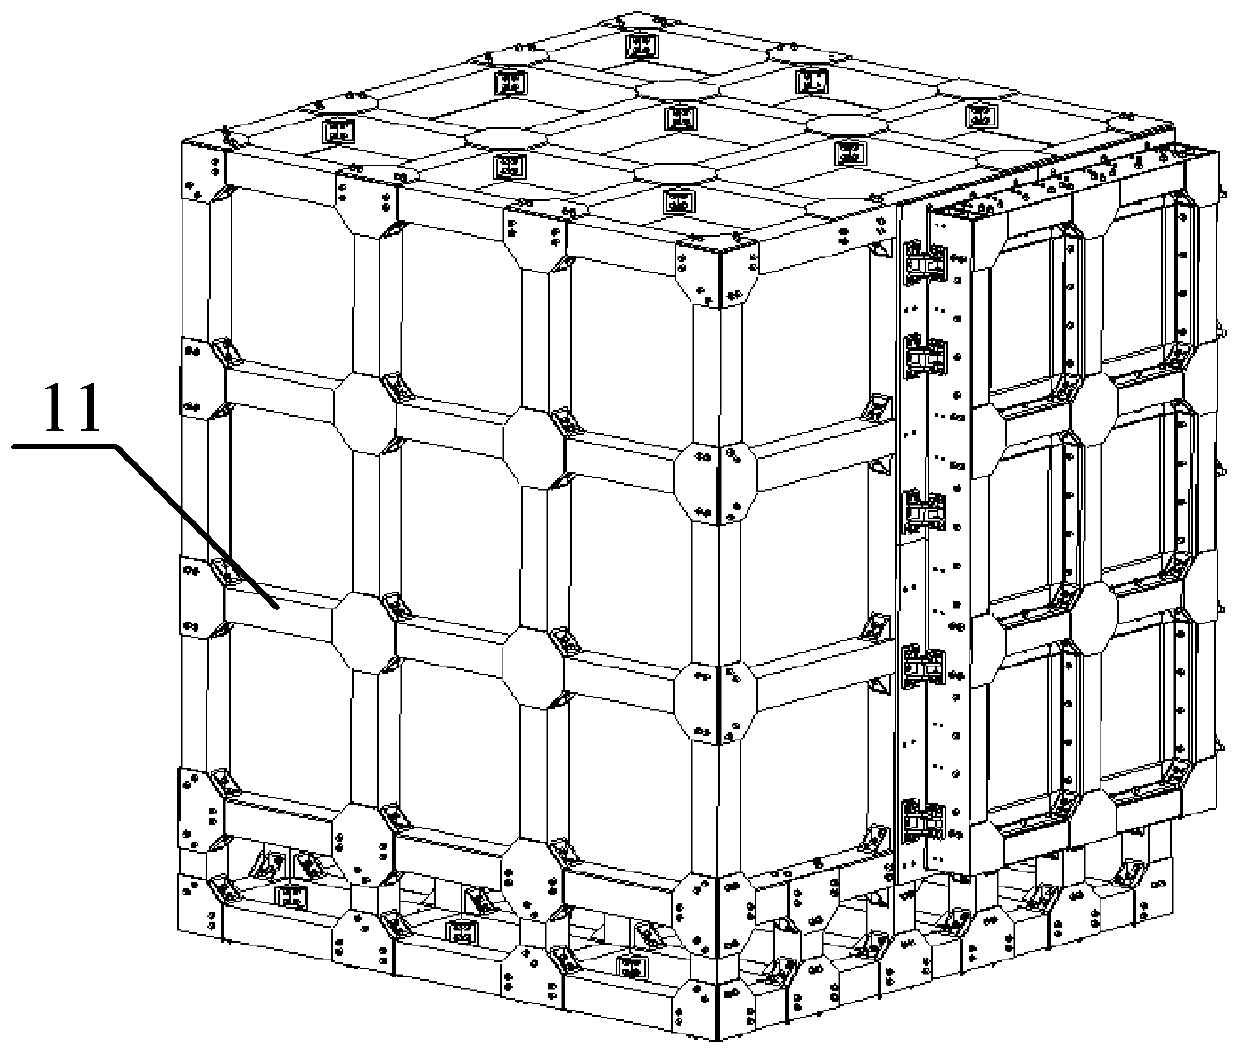 An incubator box structure and test method for passive intermodulation test